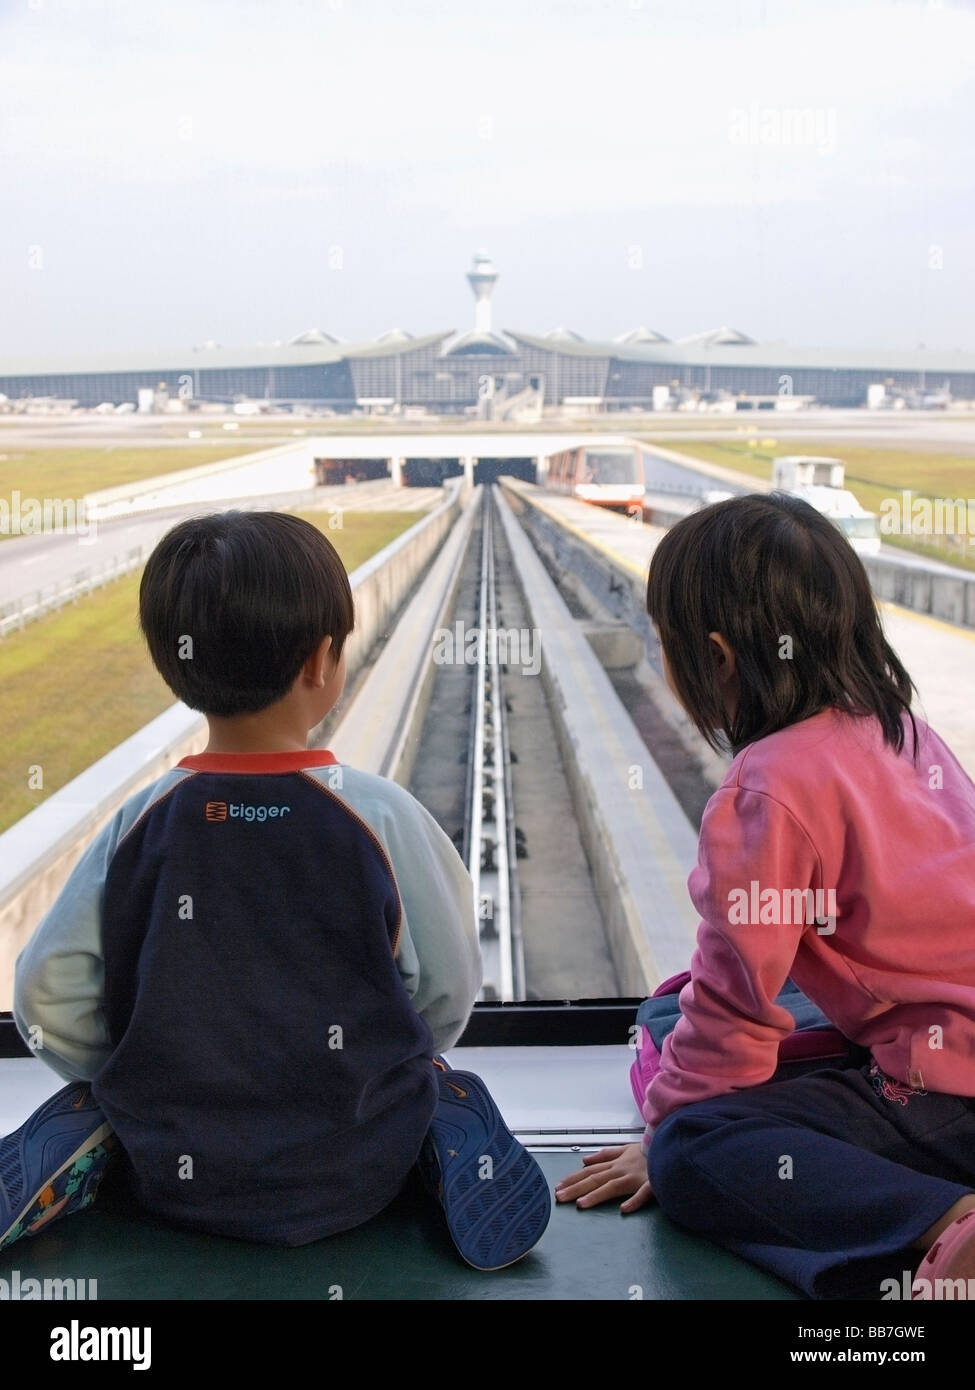 TWO YOUNG CHILDREN LOOKING BACK AT TRAIN ON TRANSFER TO DEPARTURE AREA,  KLIA AIRPORT SEPANG MALAYSIA Stock Photo